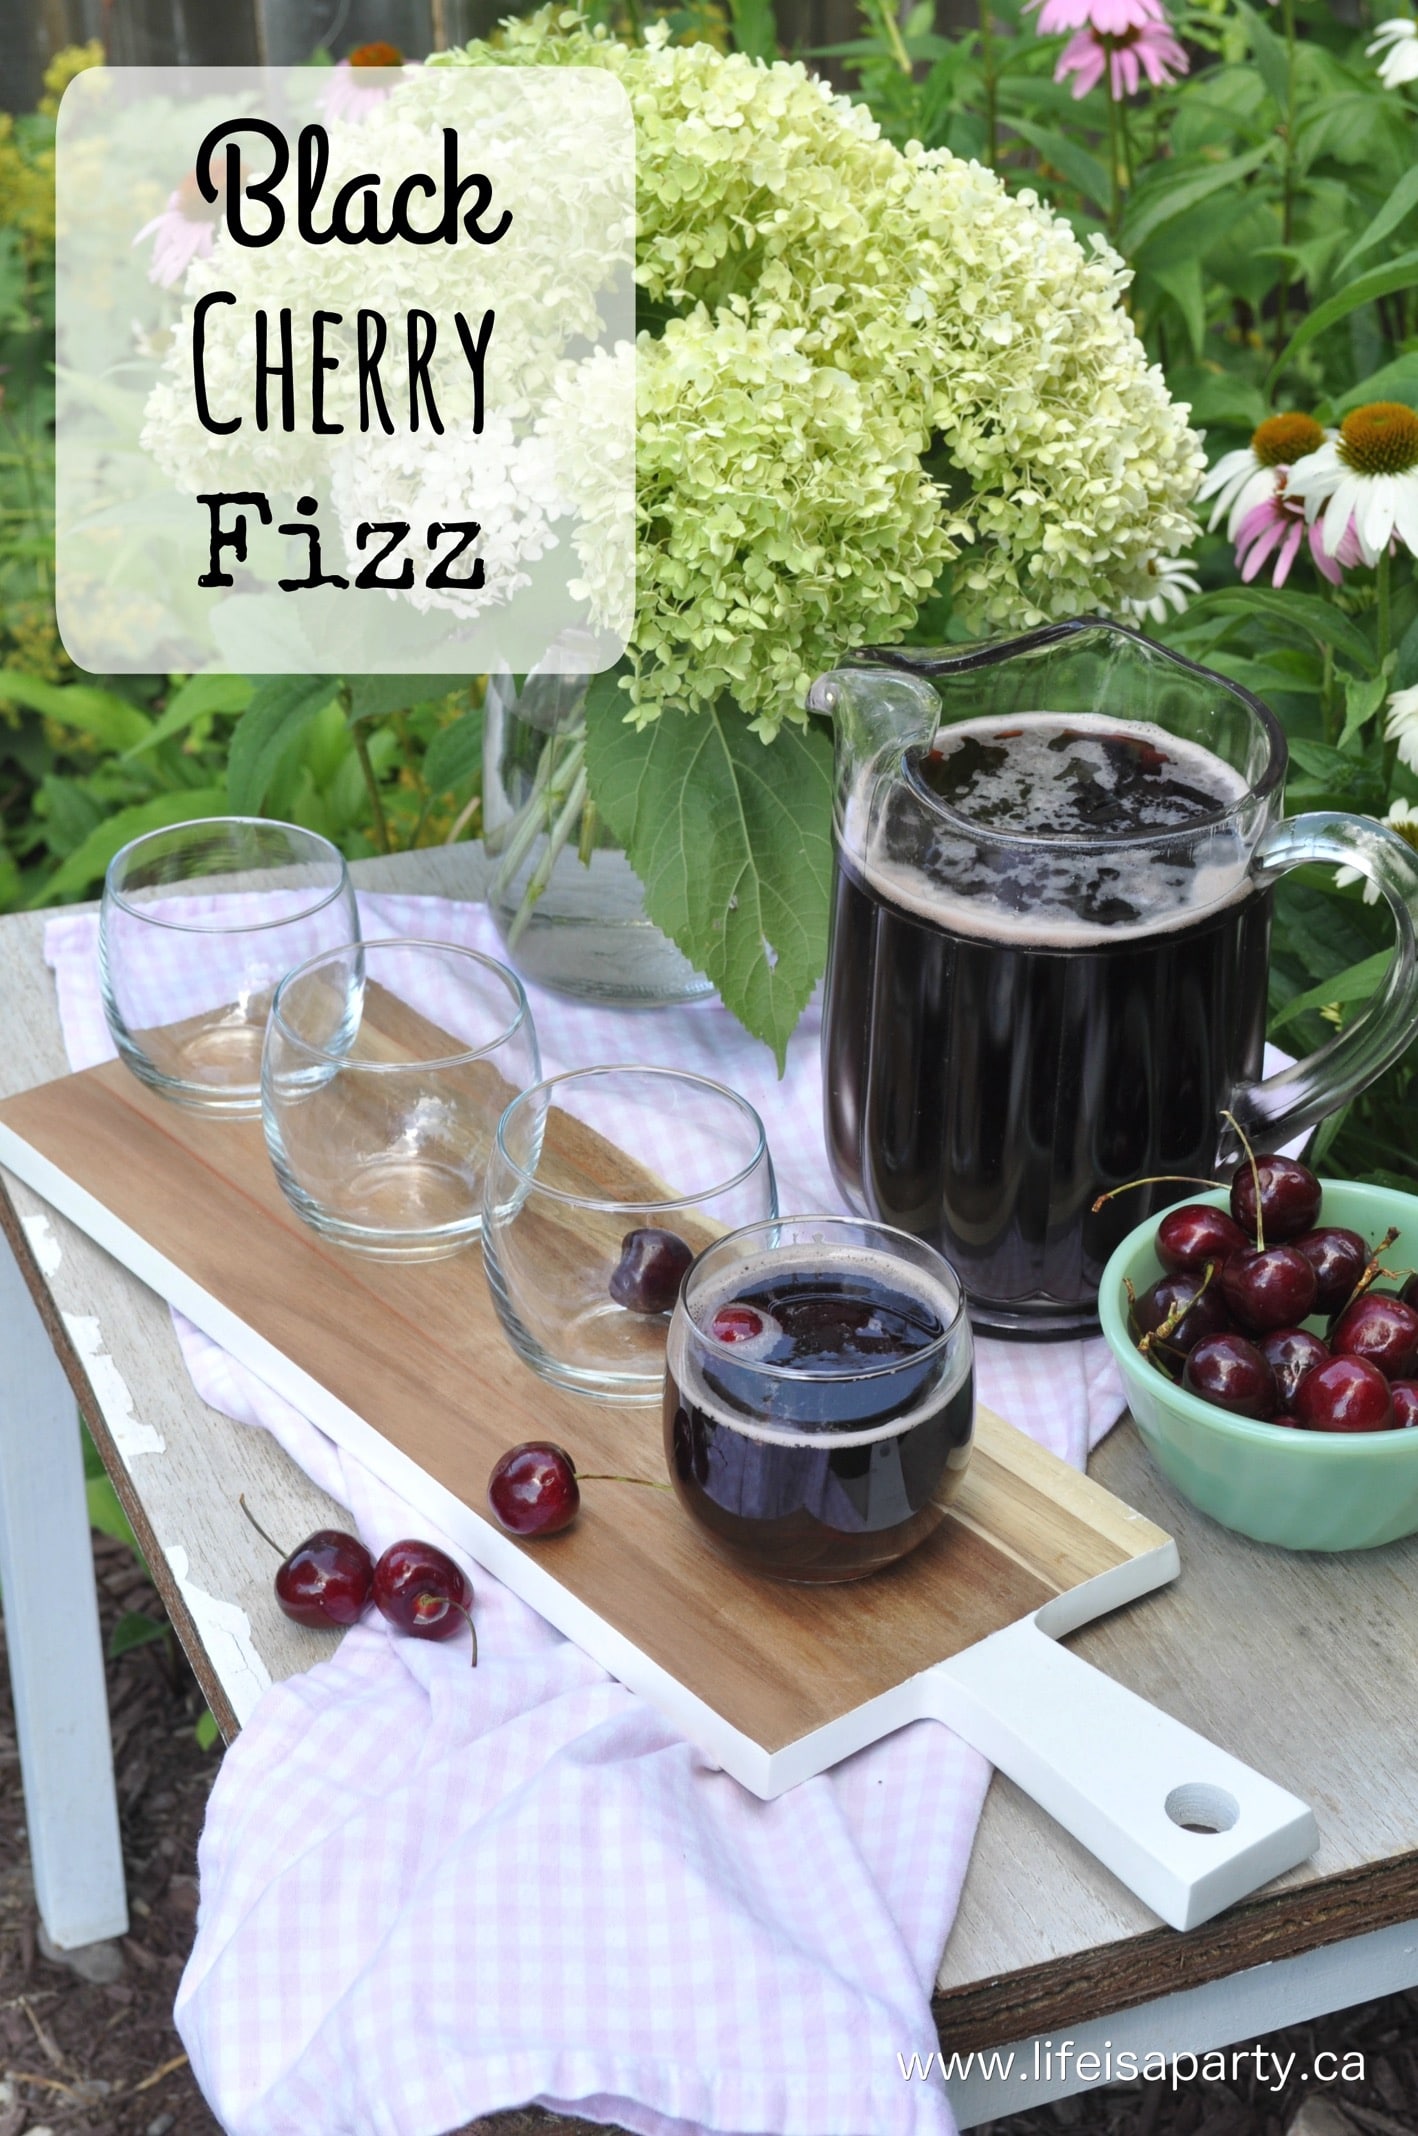 Black Cherry Drink: A new twist on an old favourite, cherry popsicles inspired this simple, 3 ingredient black cherry drink, sure to refresh.